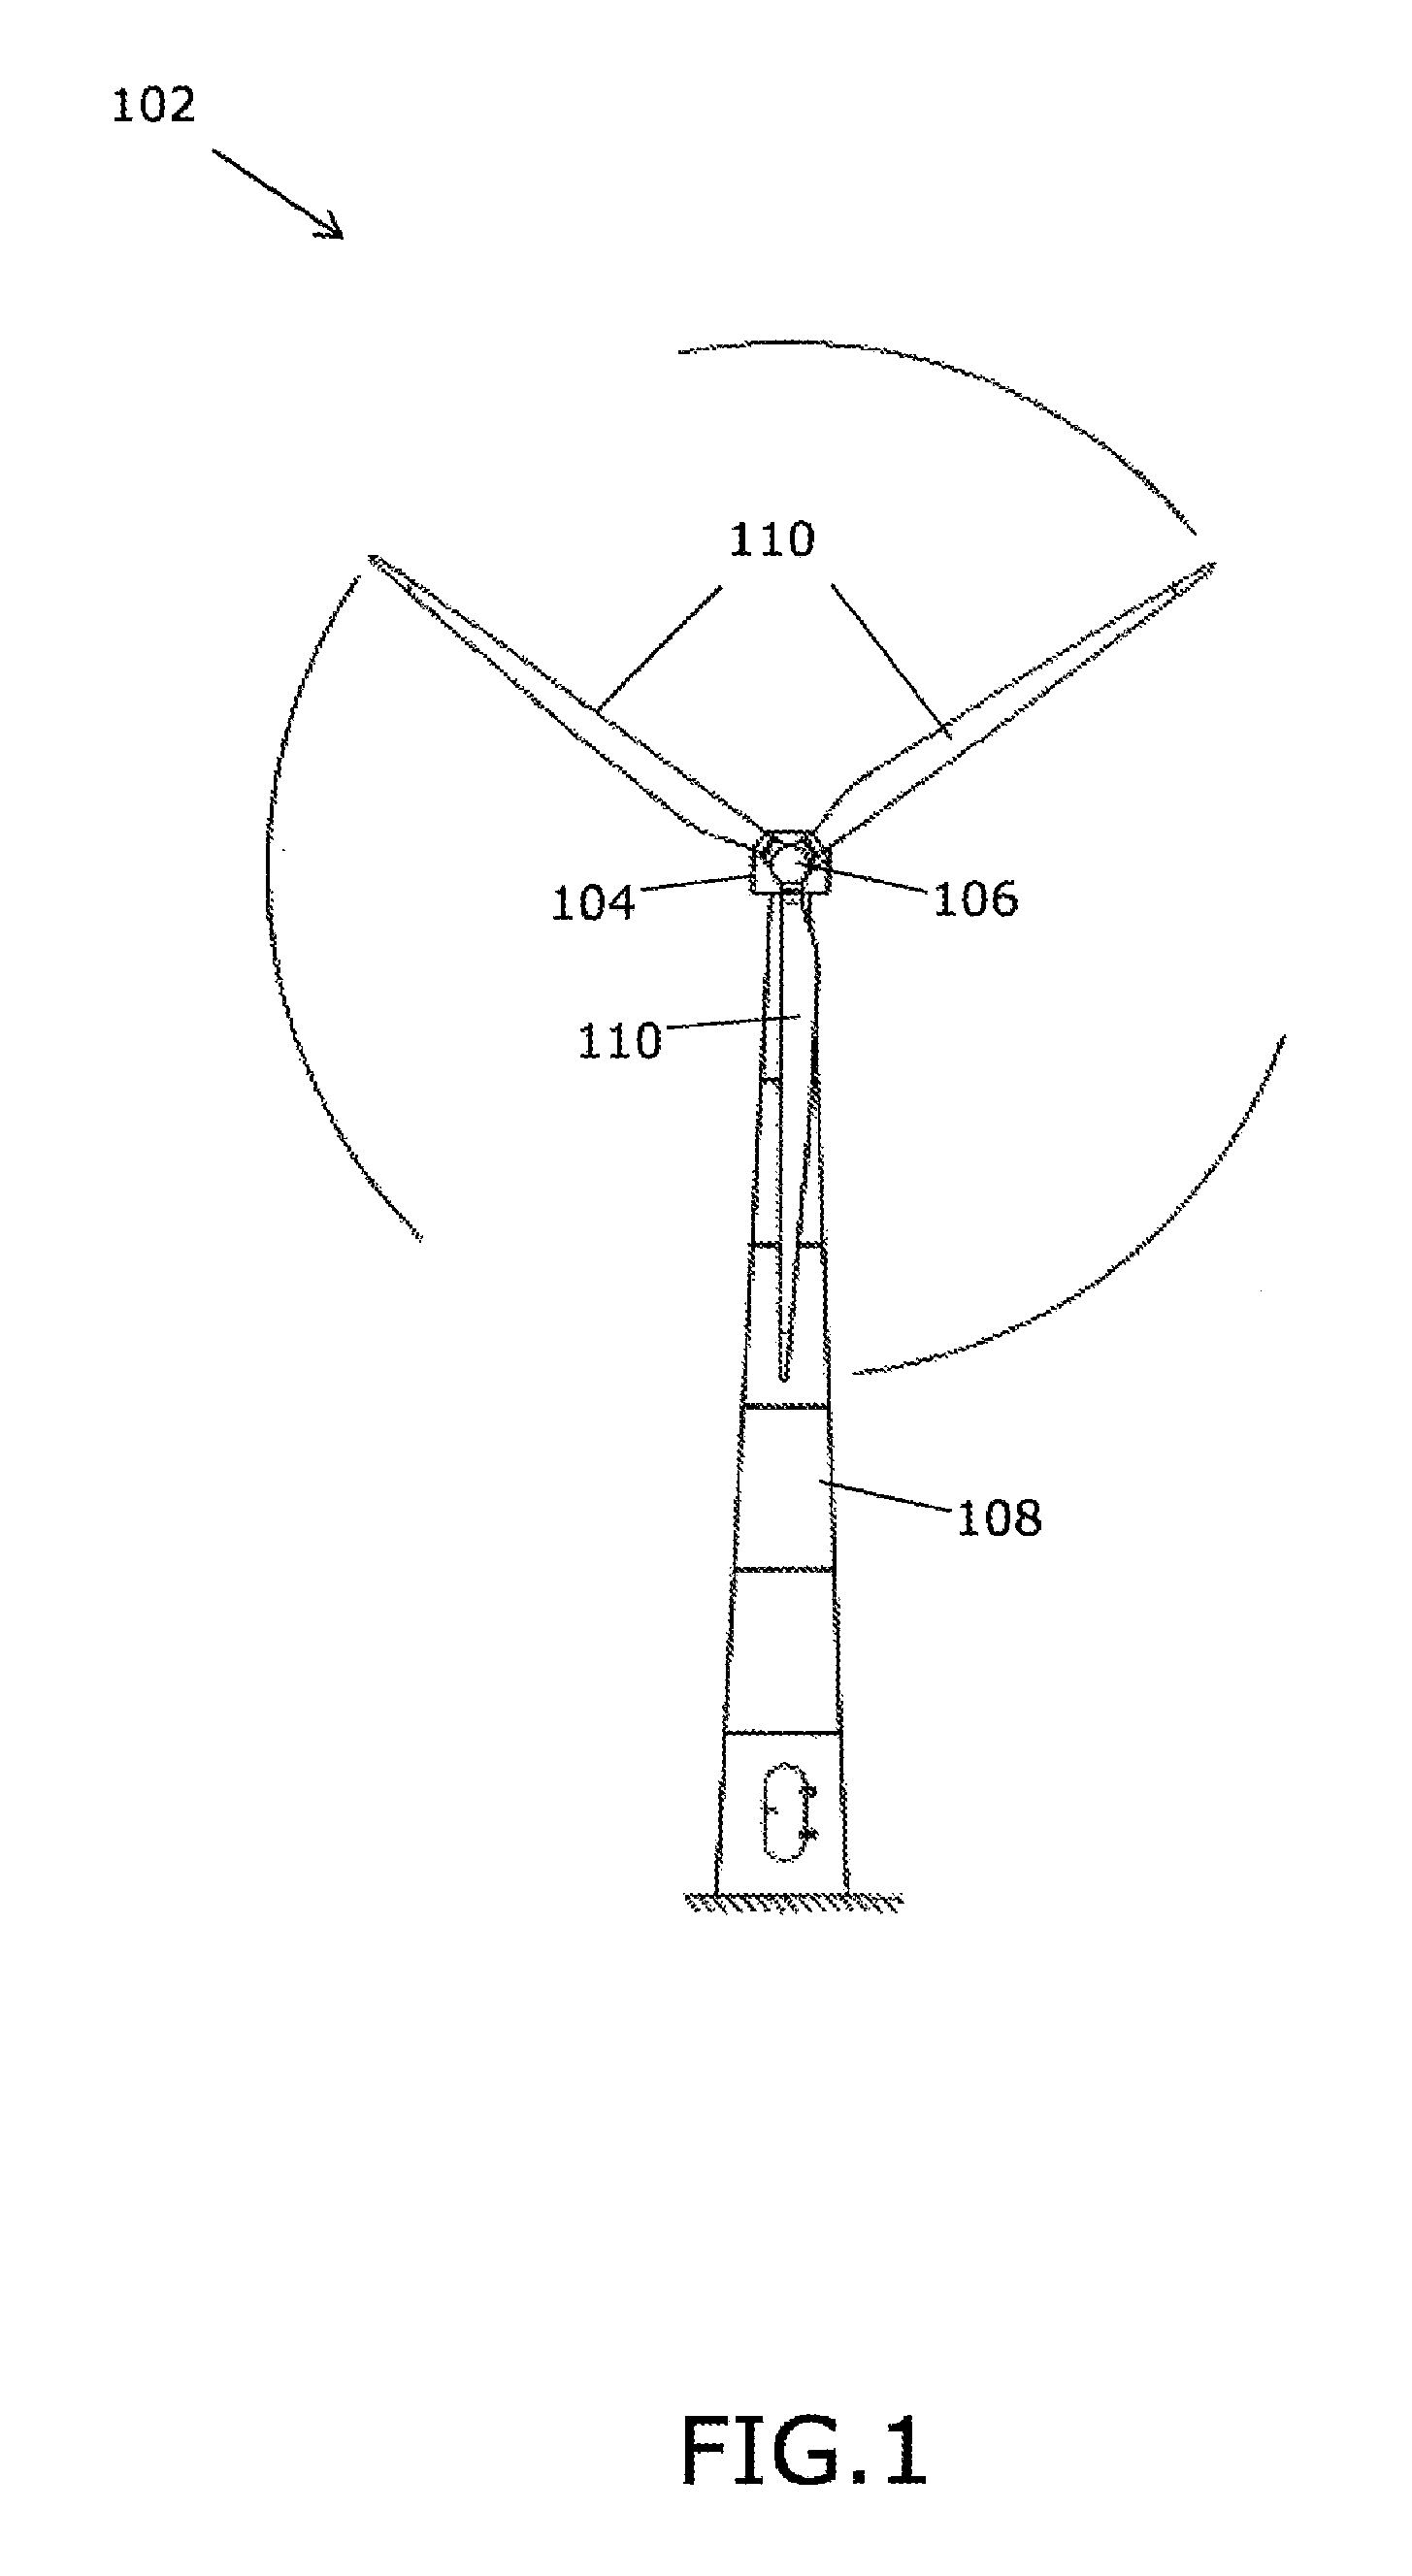 Shrink disk connection for a wind turbine